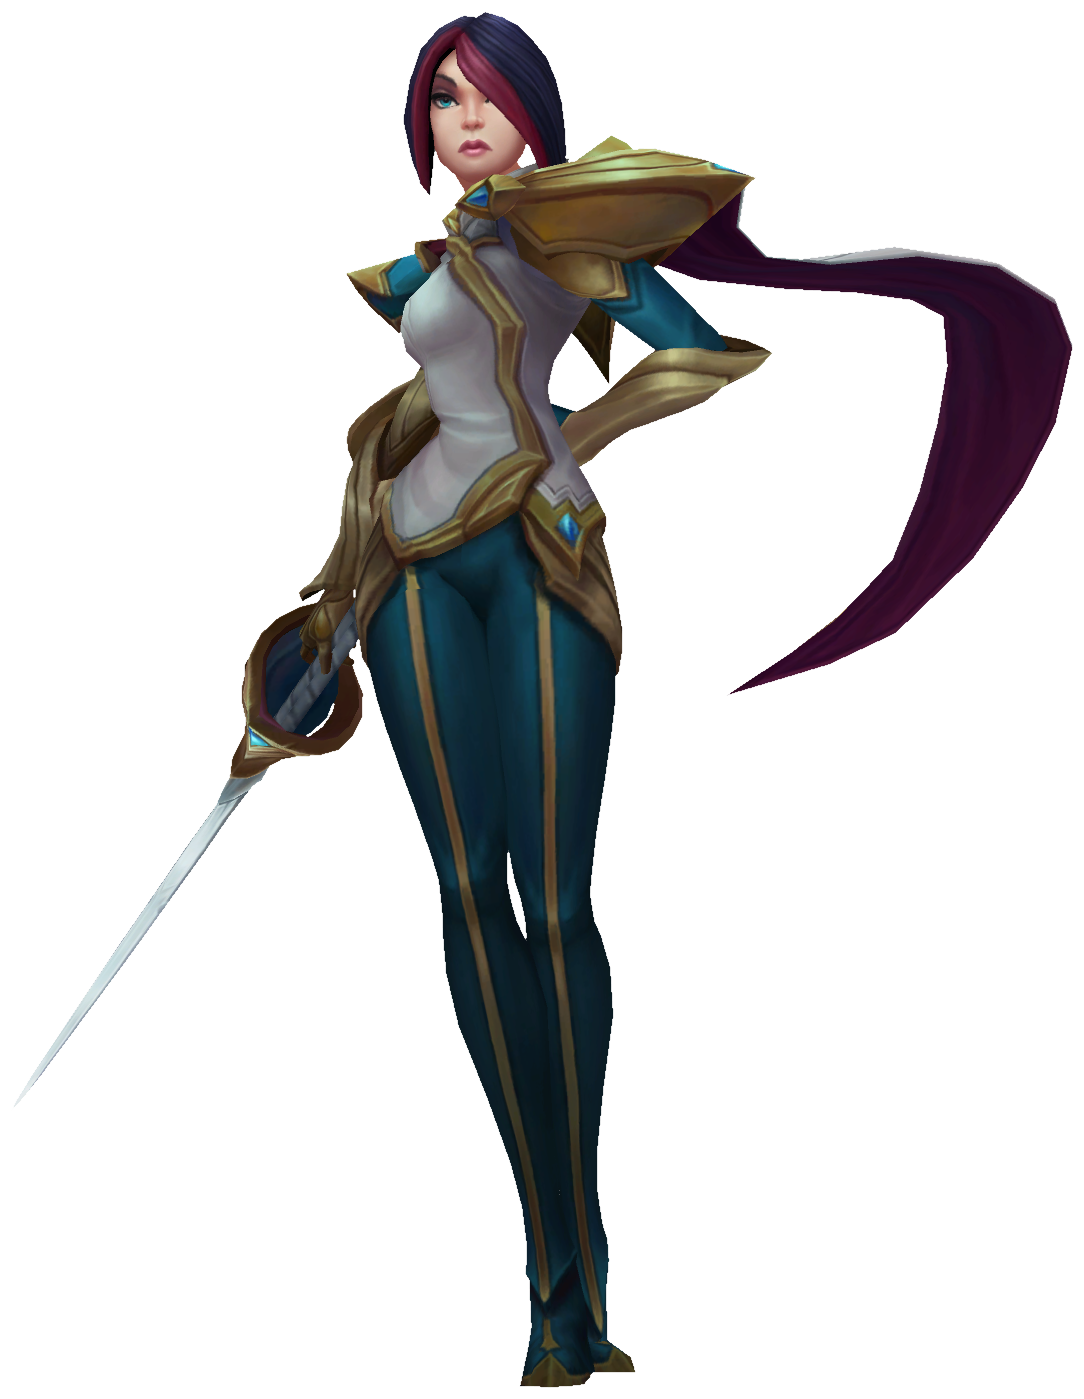 How Well Do You Know Fiora's Lore?